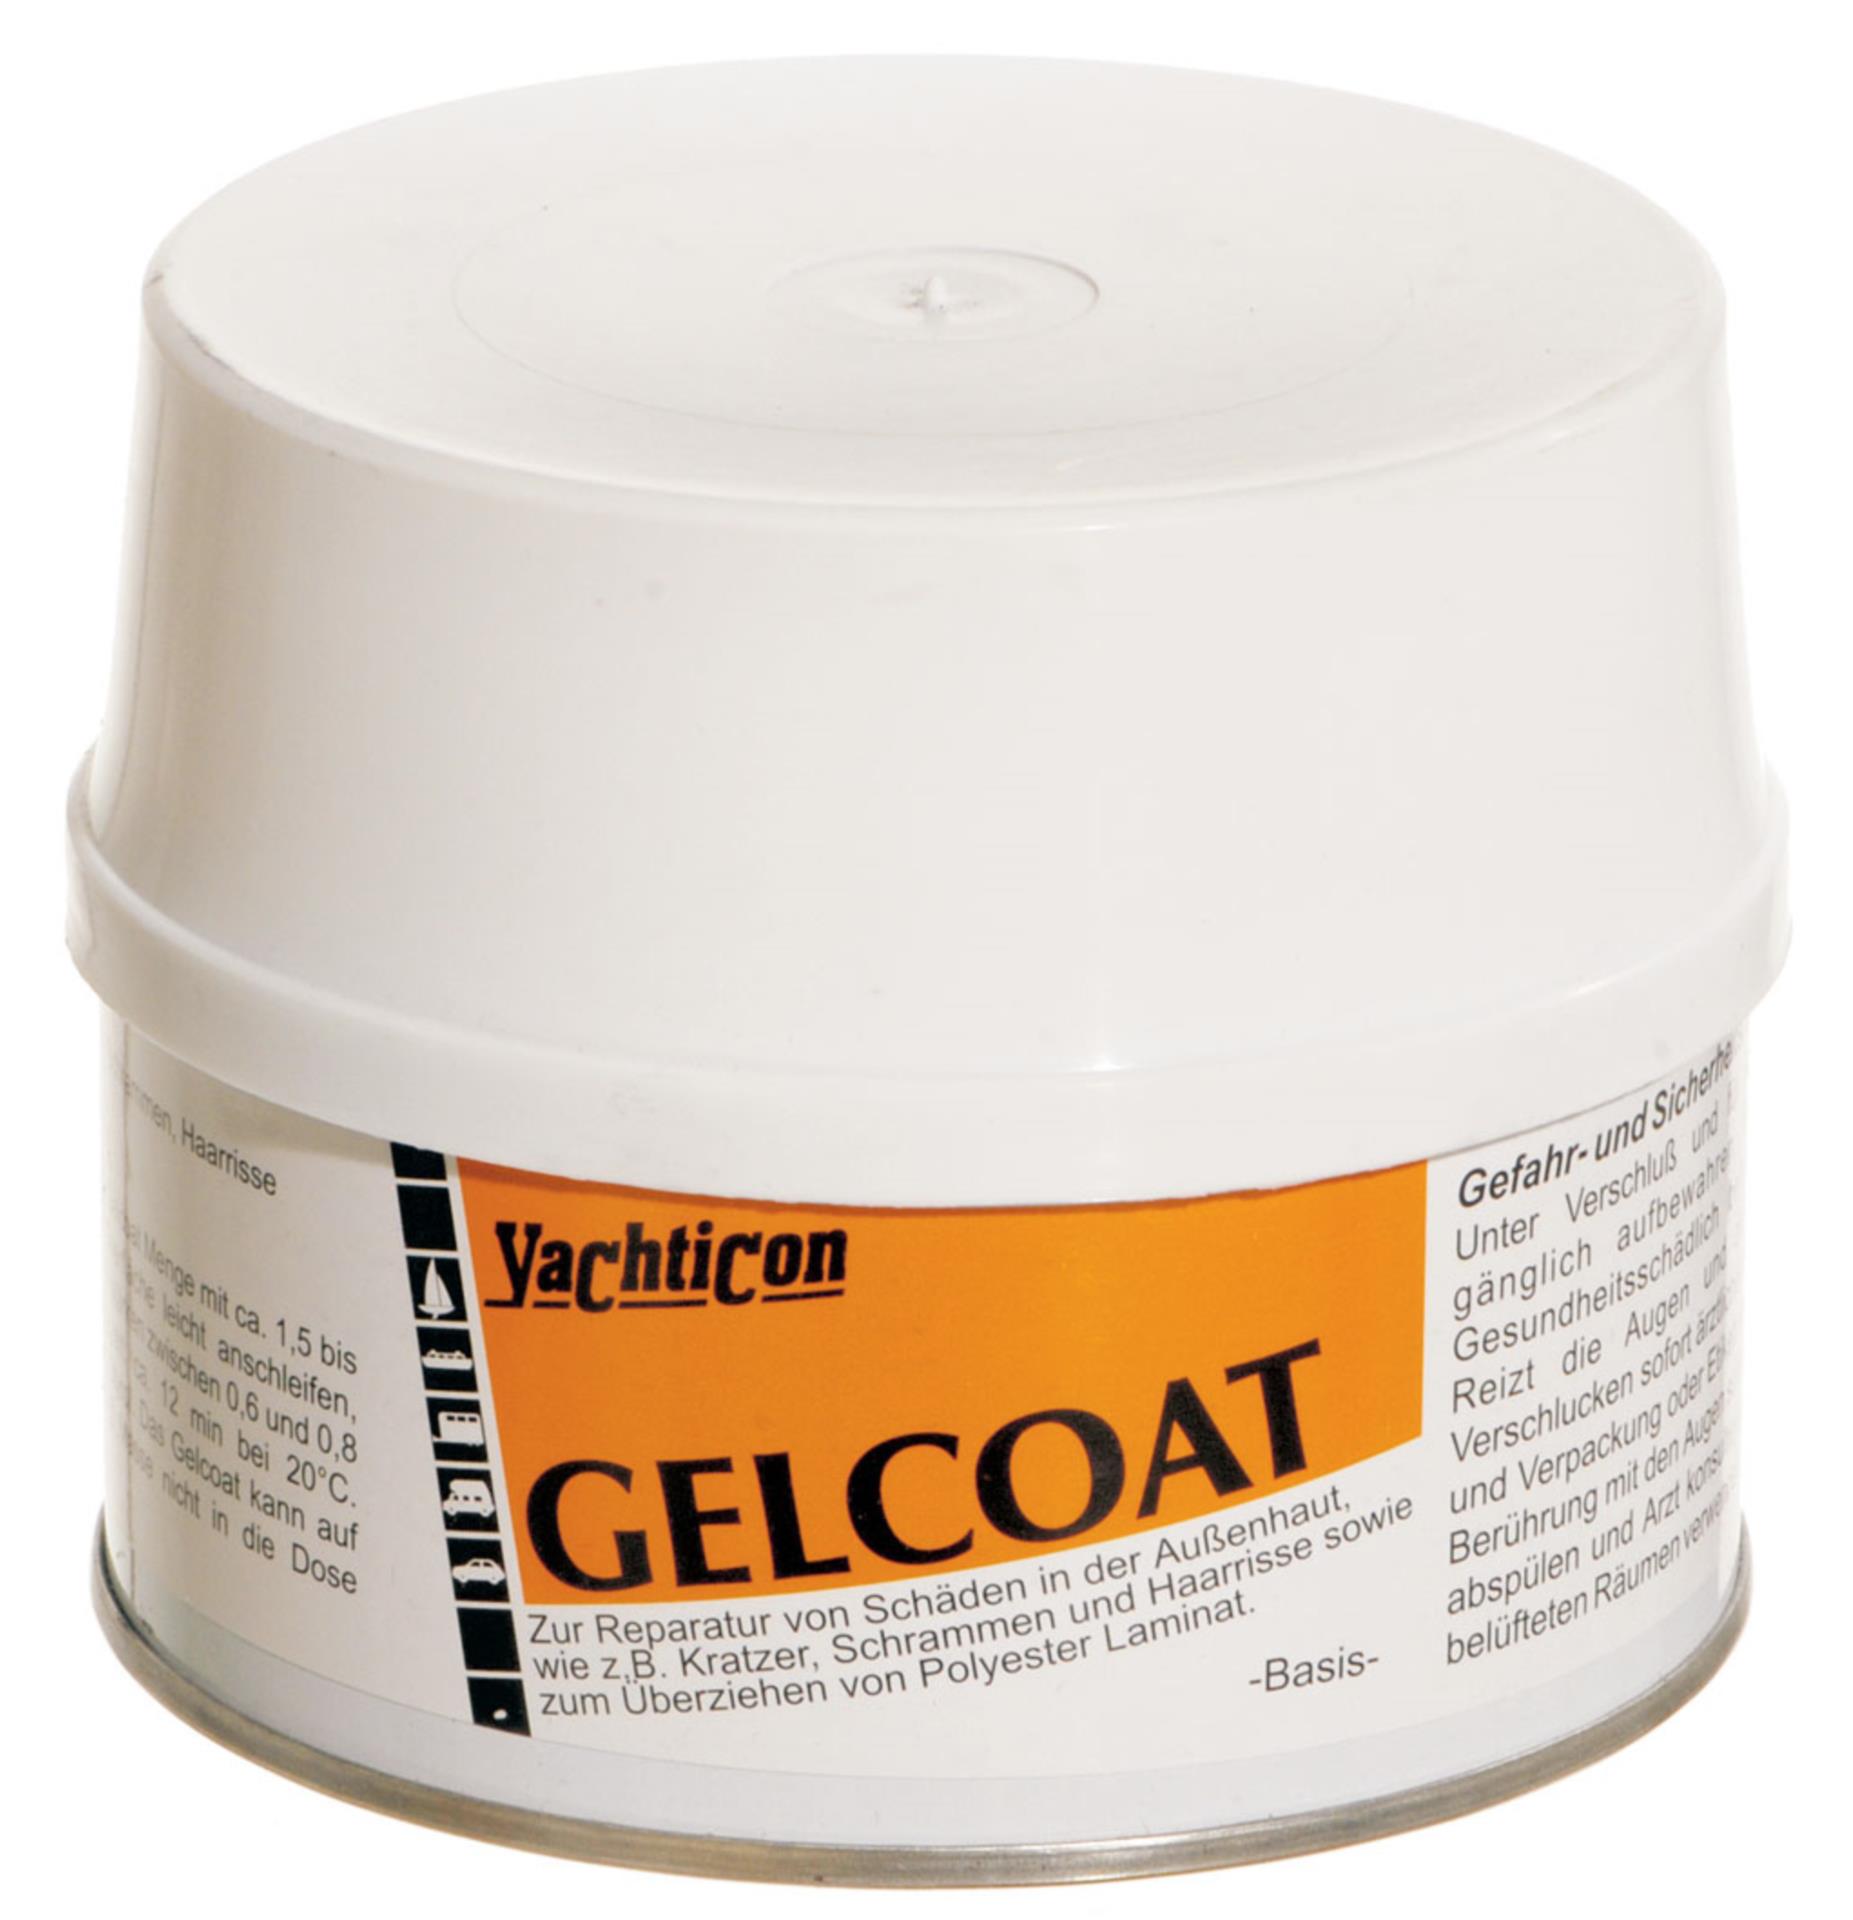 Yachticon Gelcoat, 250 gr.